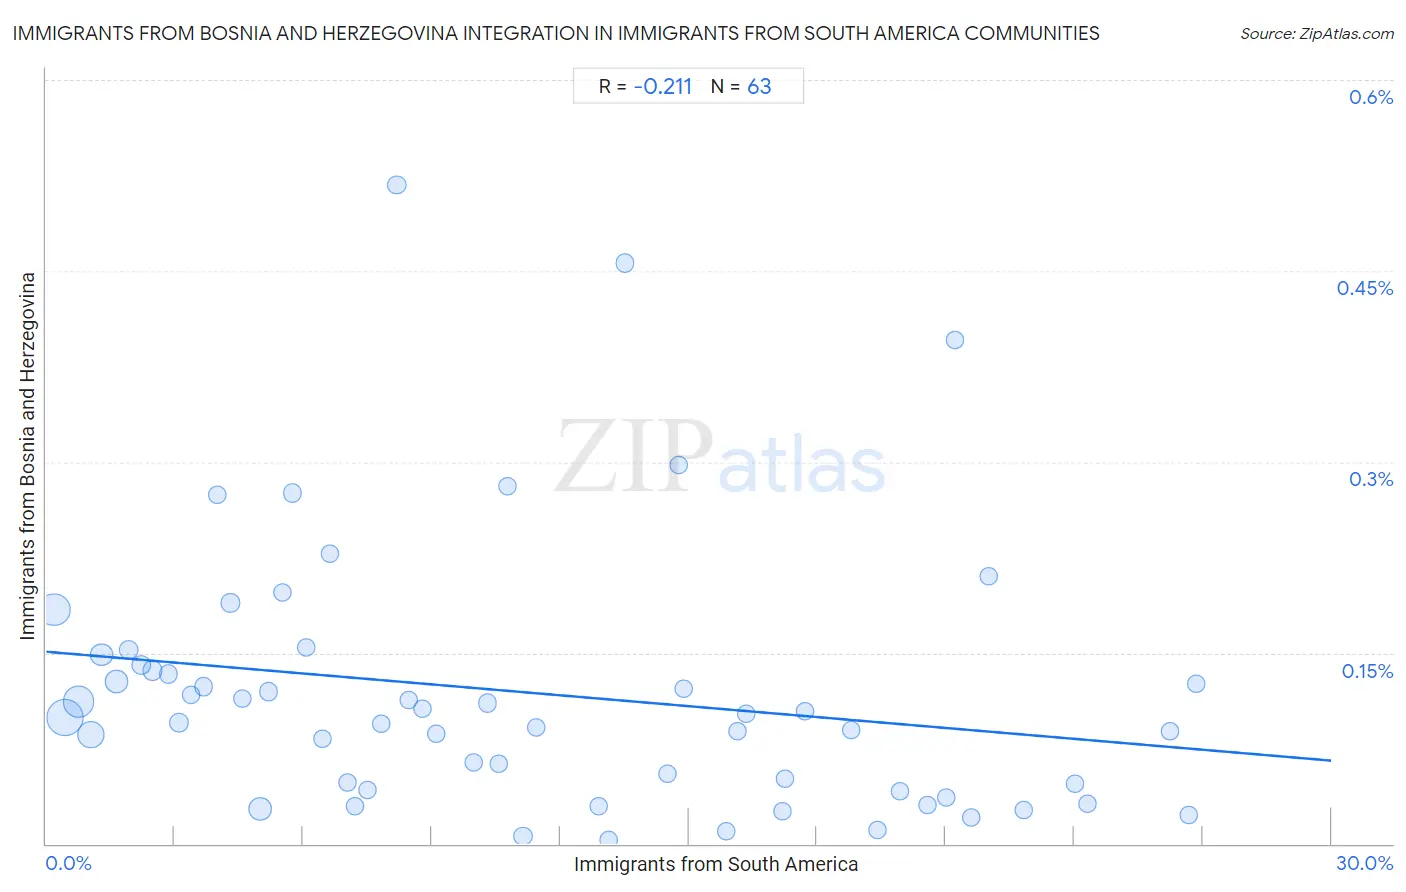 Immigrants from South America Integration in Immigrants from Bosnia and Herzegovina Communities